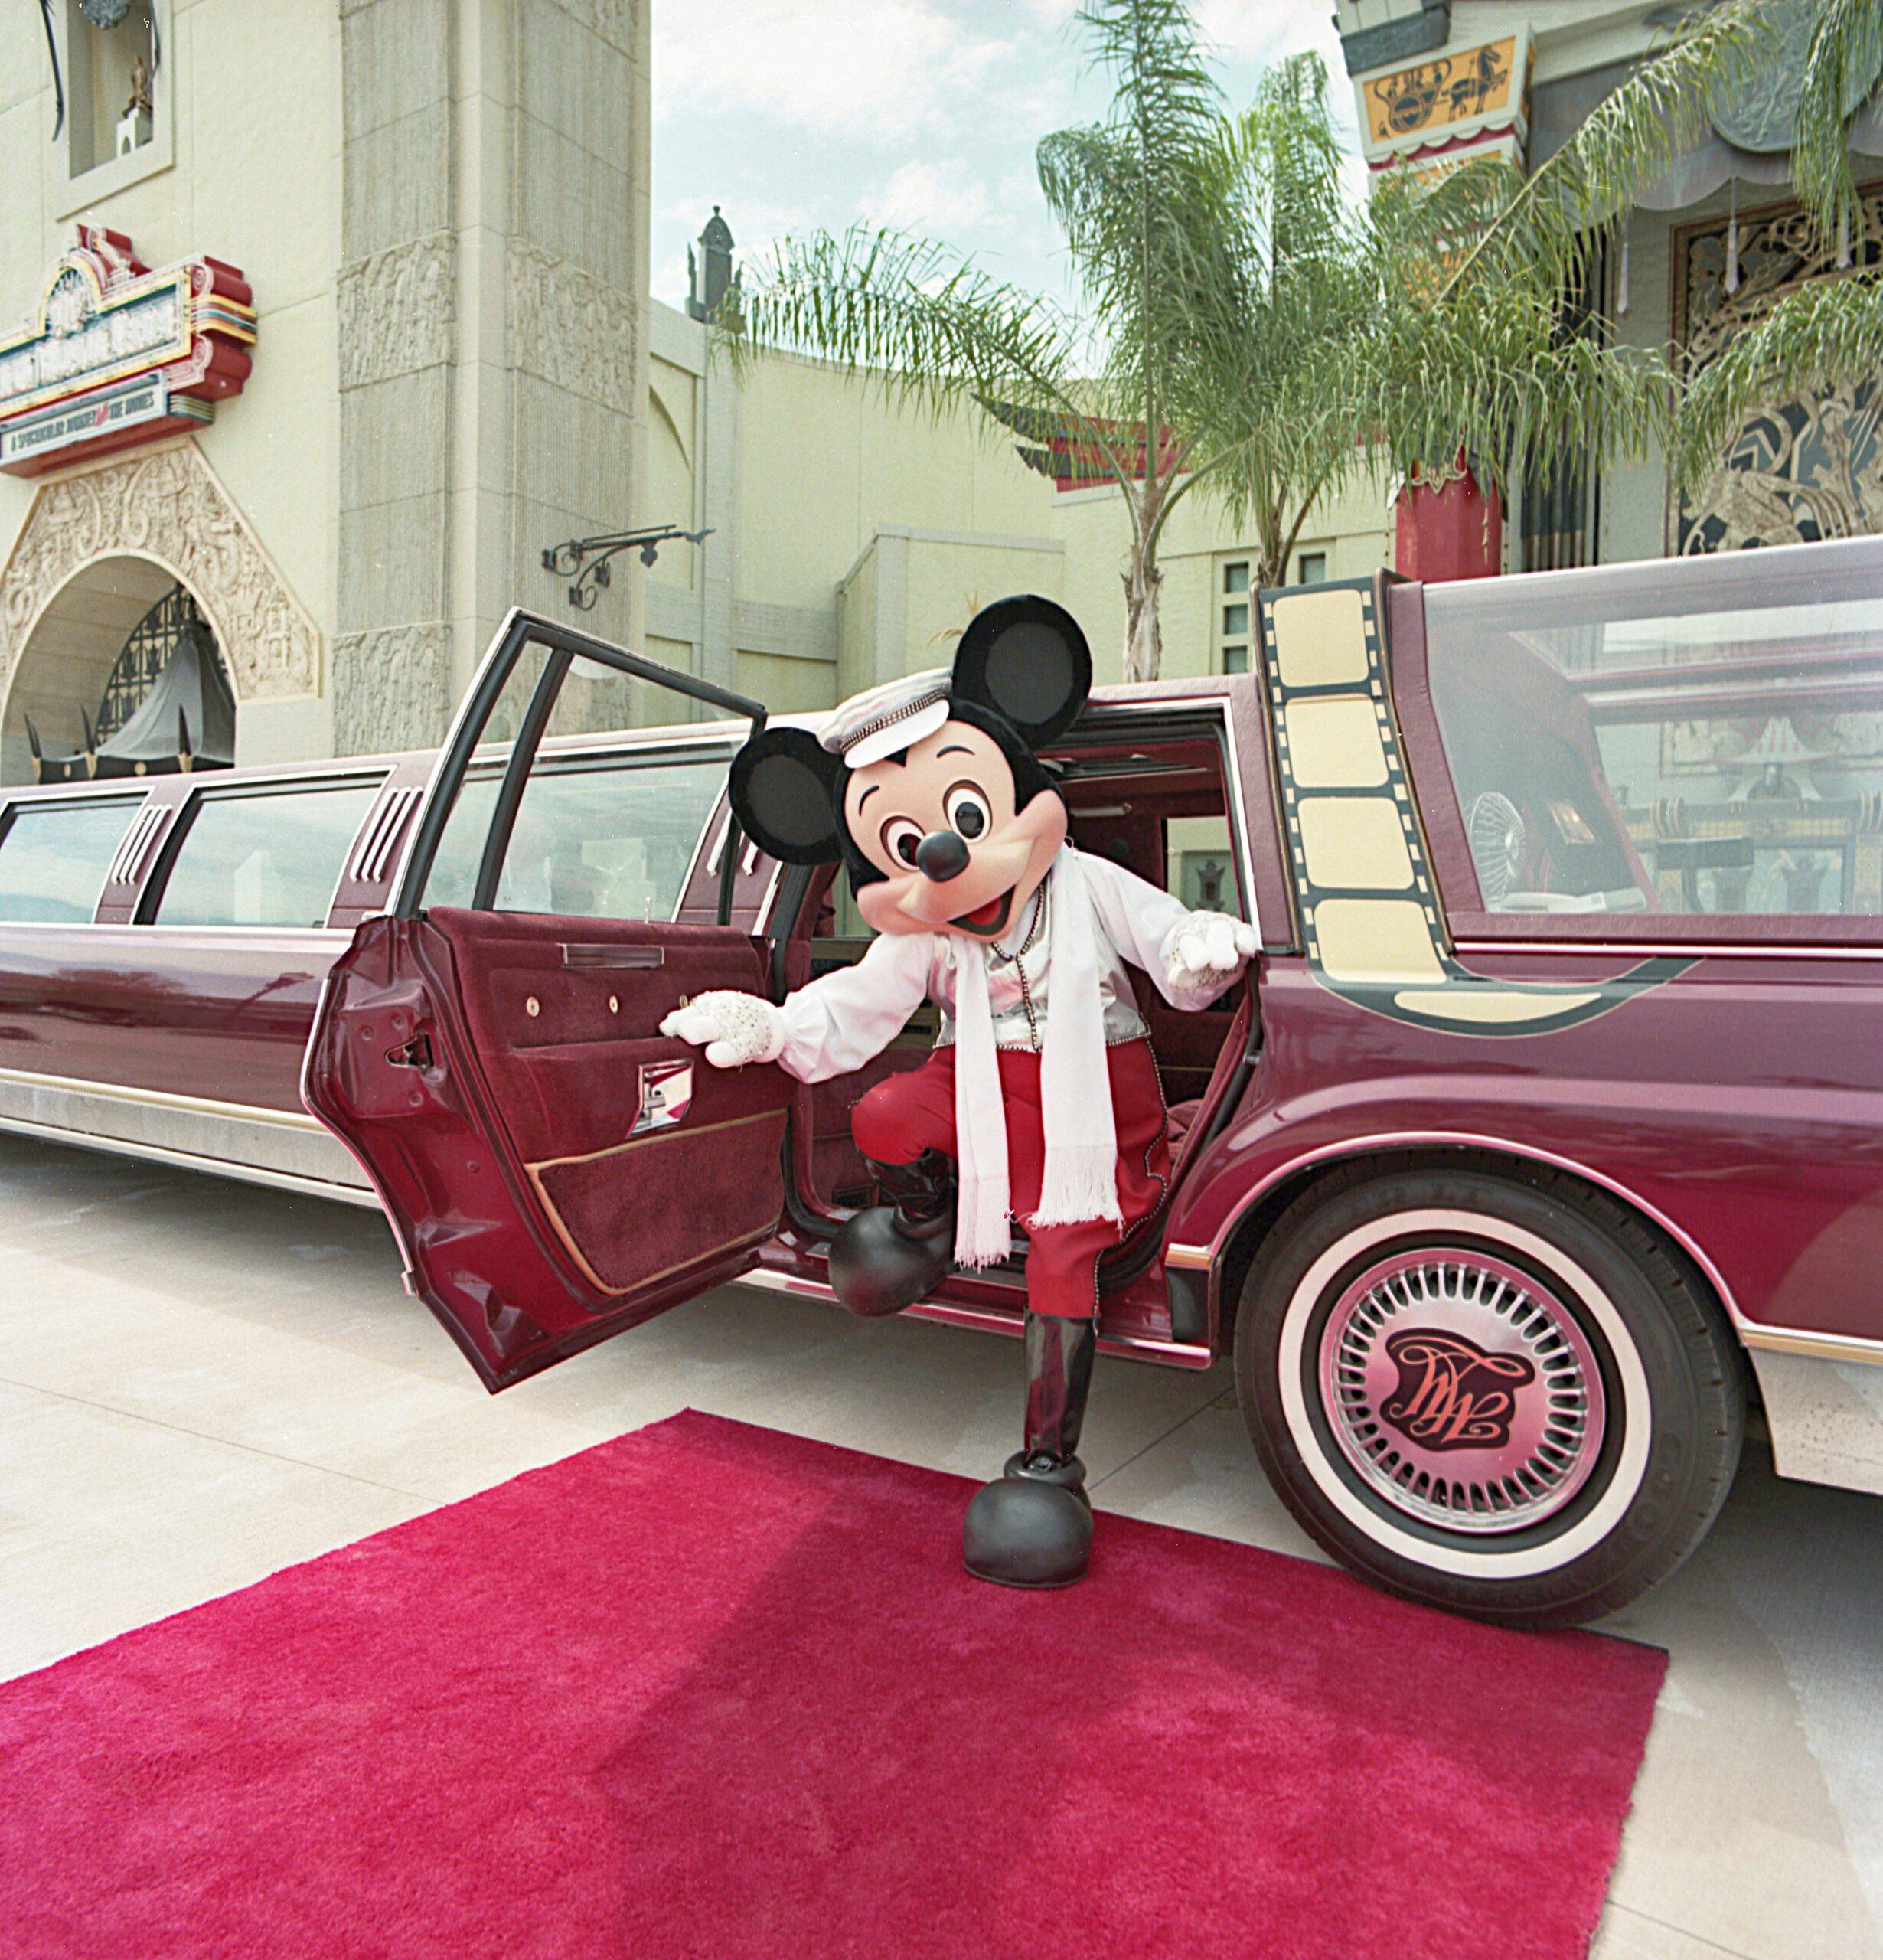 Mickey Mouse arrives in the LiMOUSEine at Disney’s Hollywood Studios at Walt Disney World Resort 1989